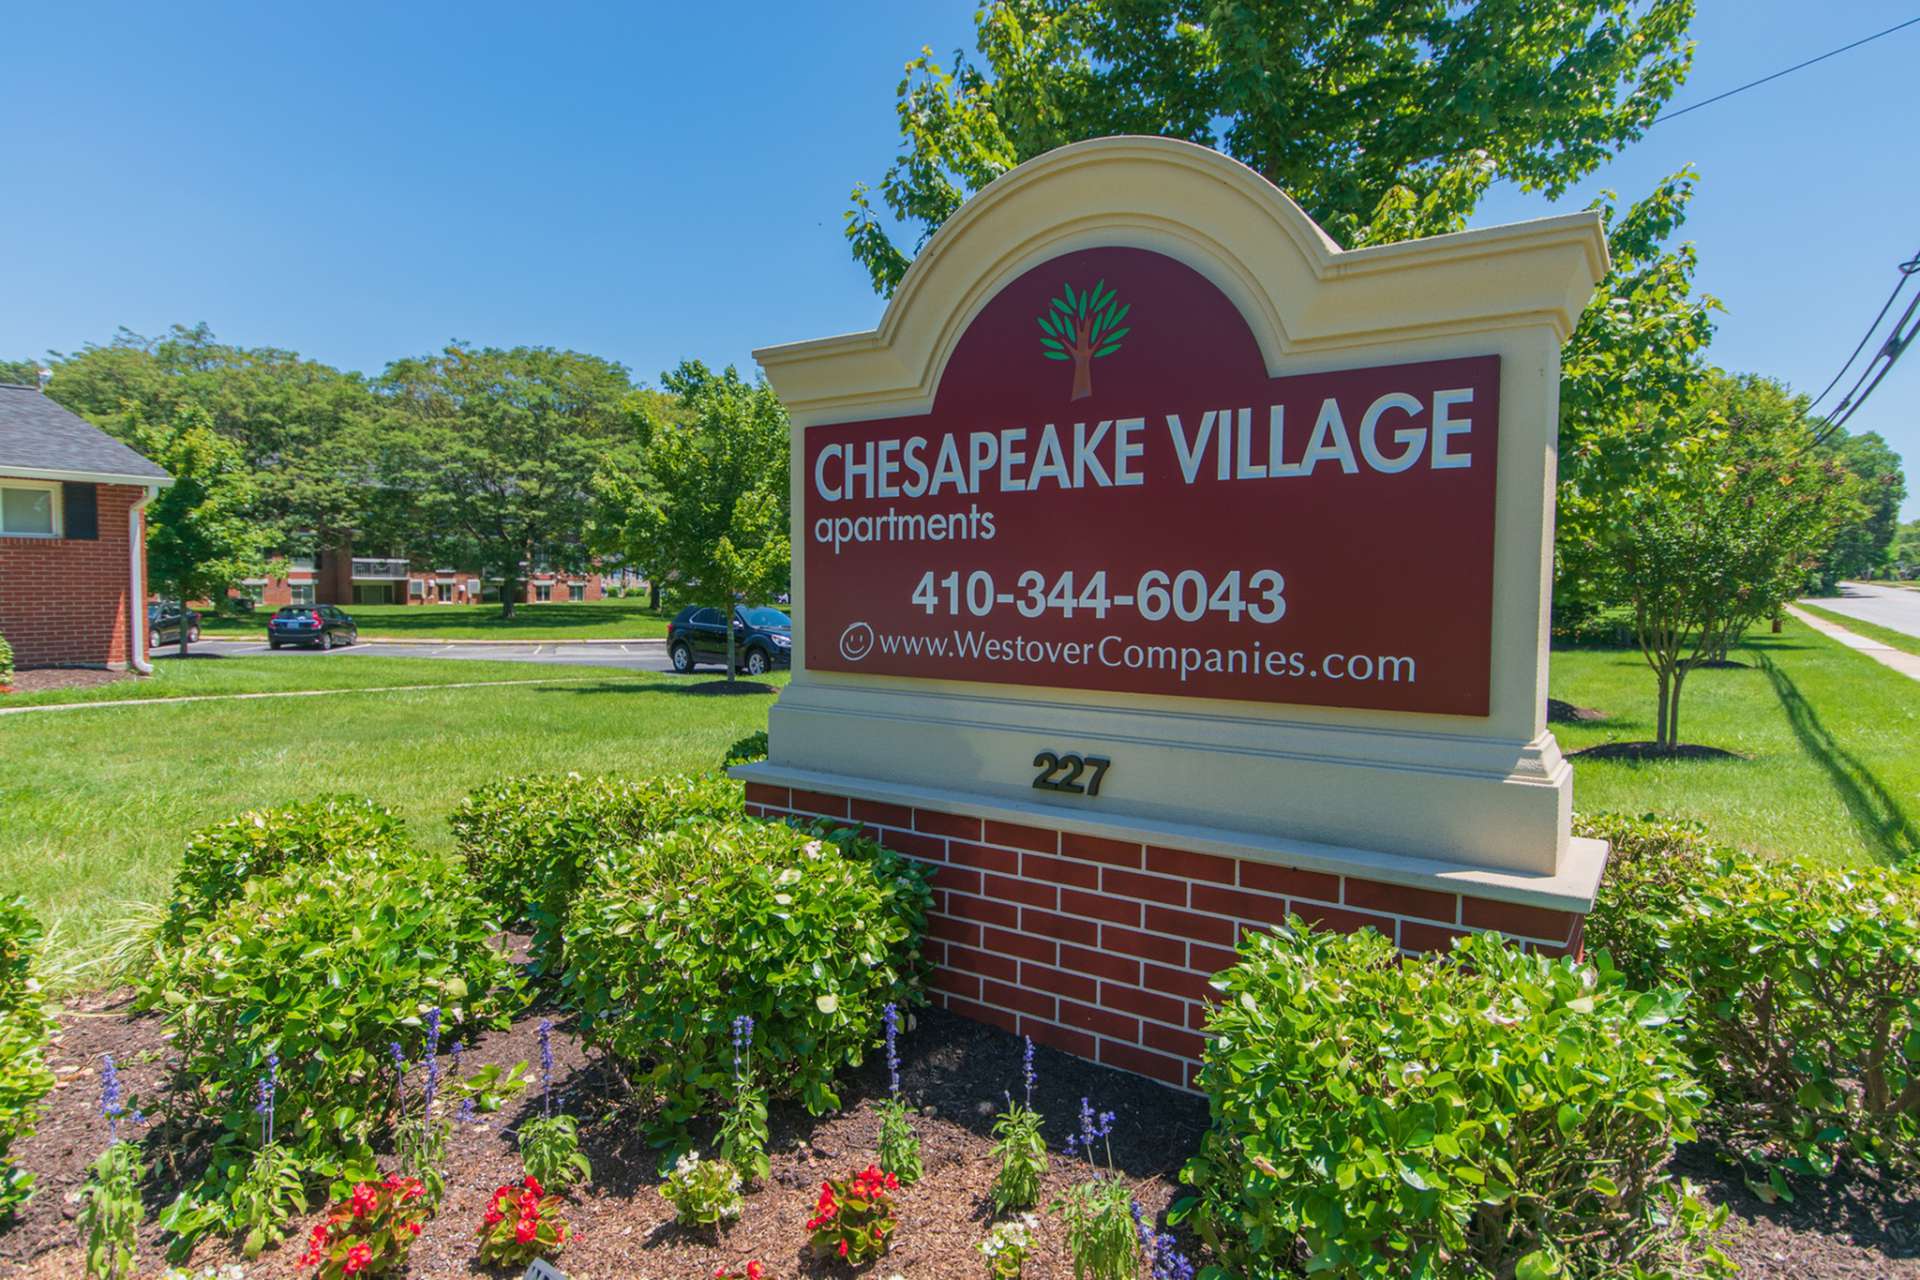 Chesapeake Village apartments welcome sign, fitted in a beautiful garden